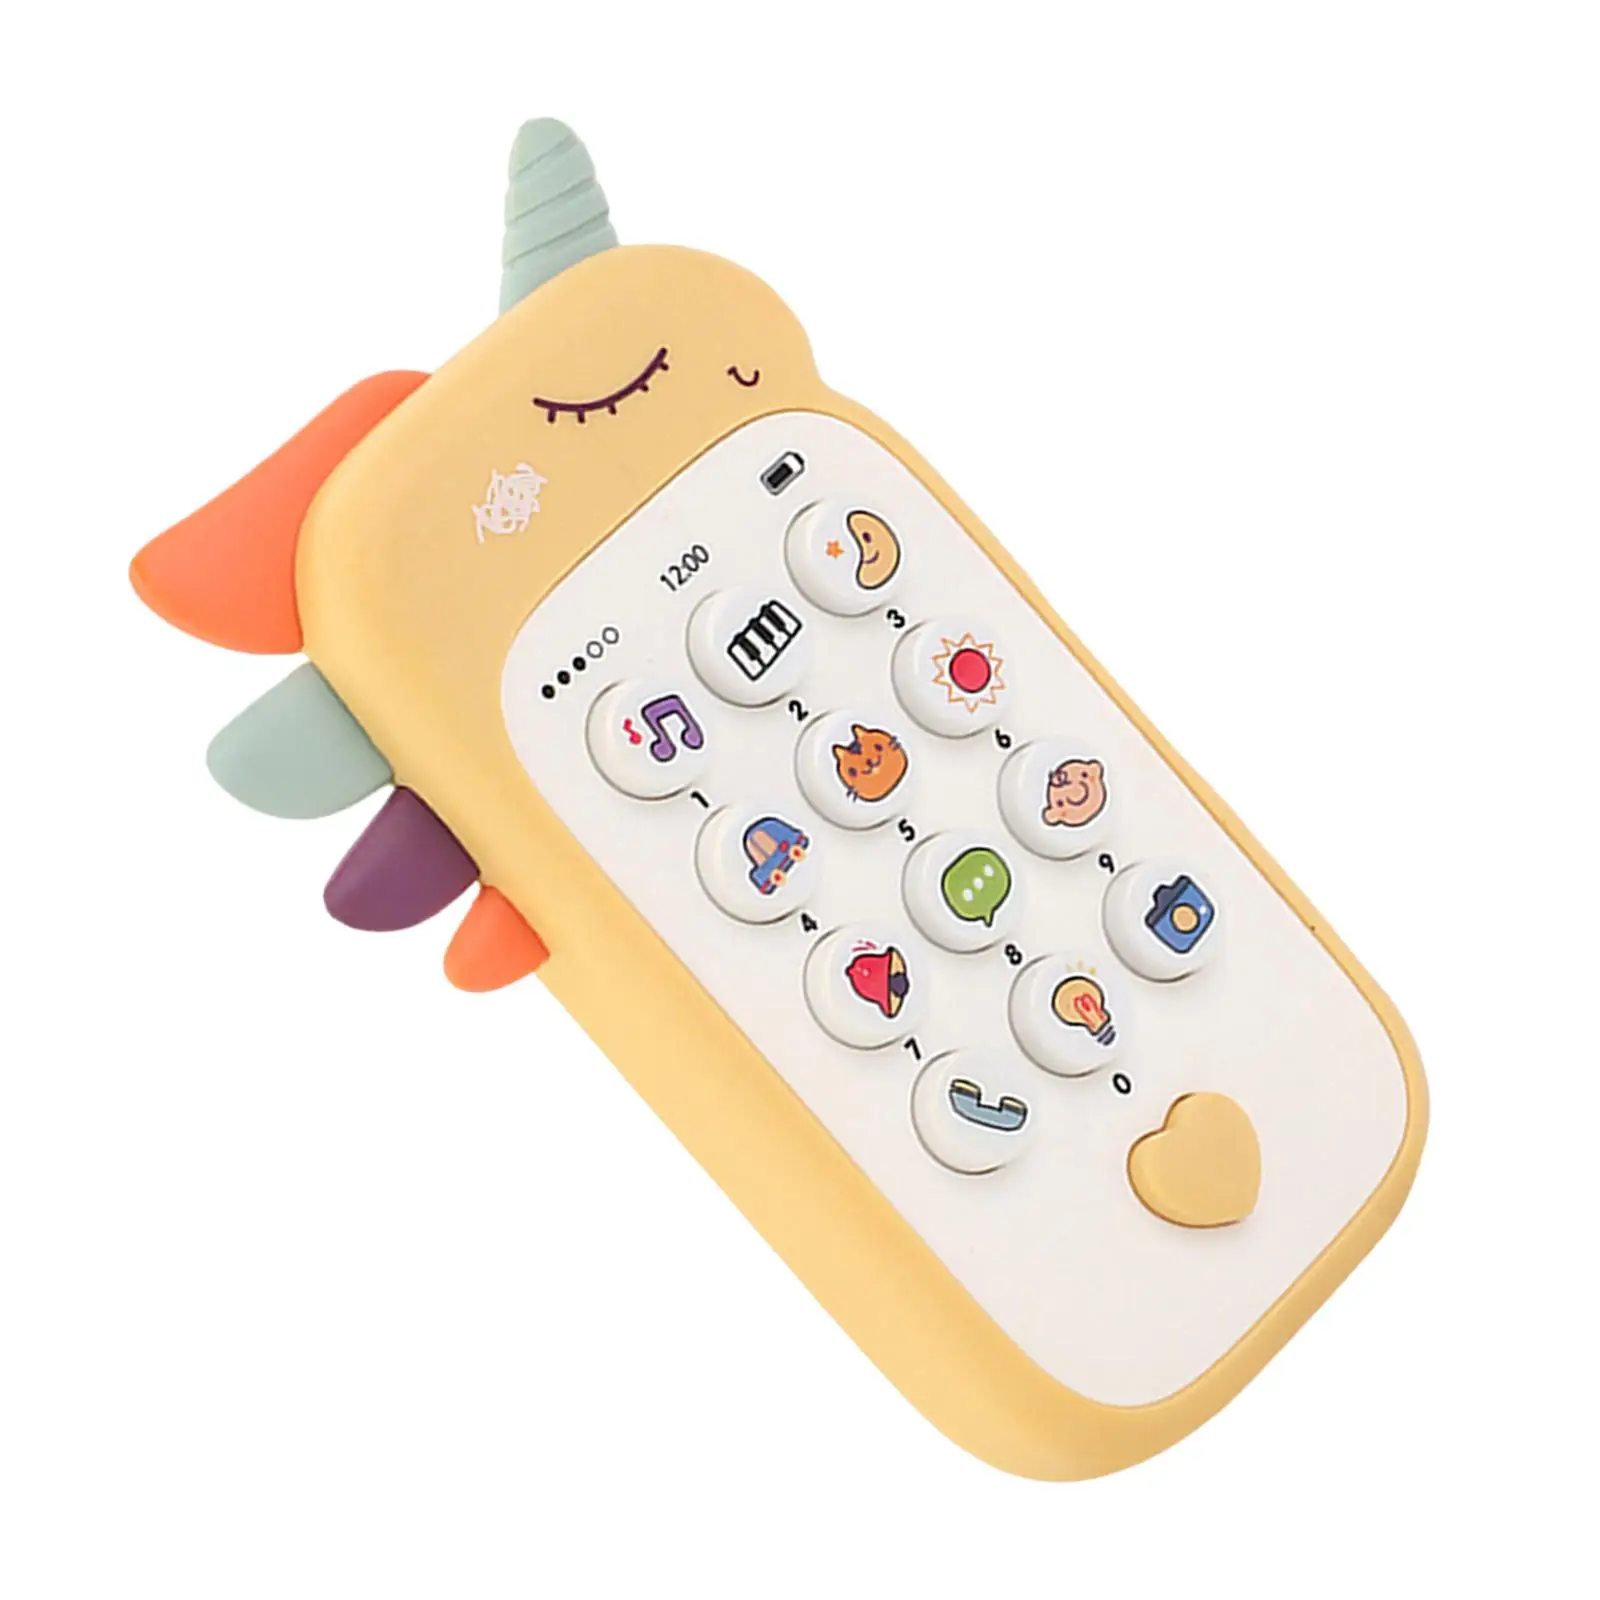 Musical Baby Cell Phone Toy Baby Light up Toy Play Phones with Lights for Boys Girls Baby Infants 2 3 Years Old Aged 18Months+